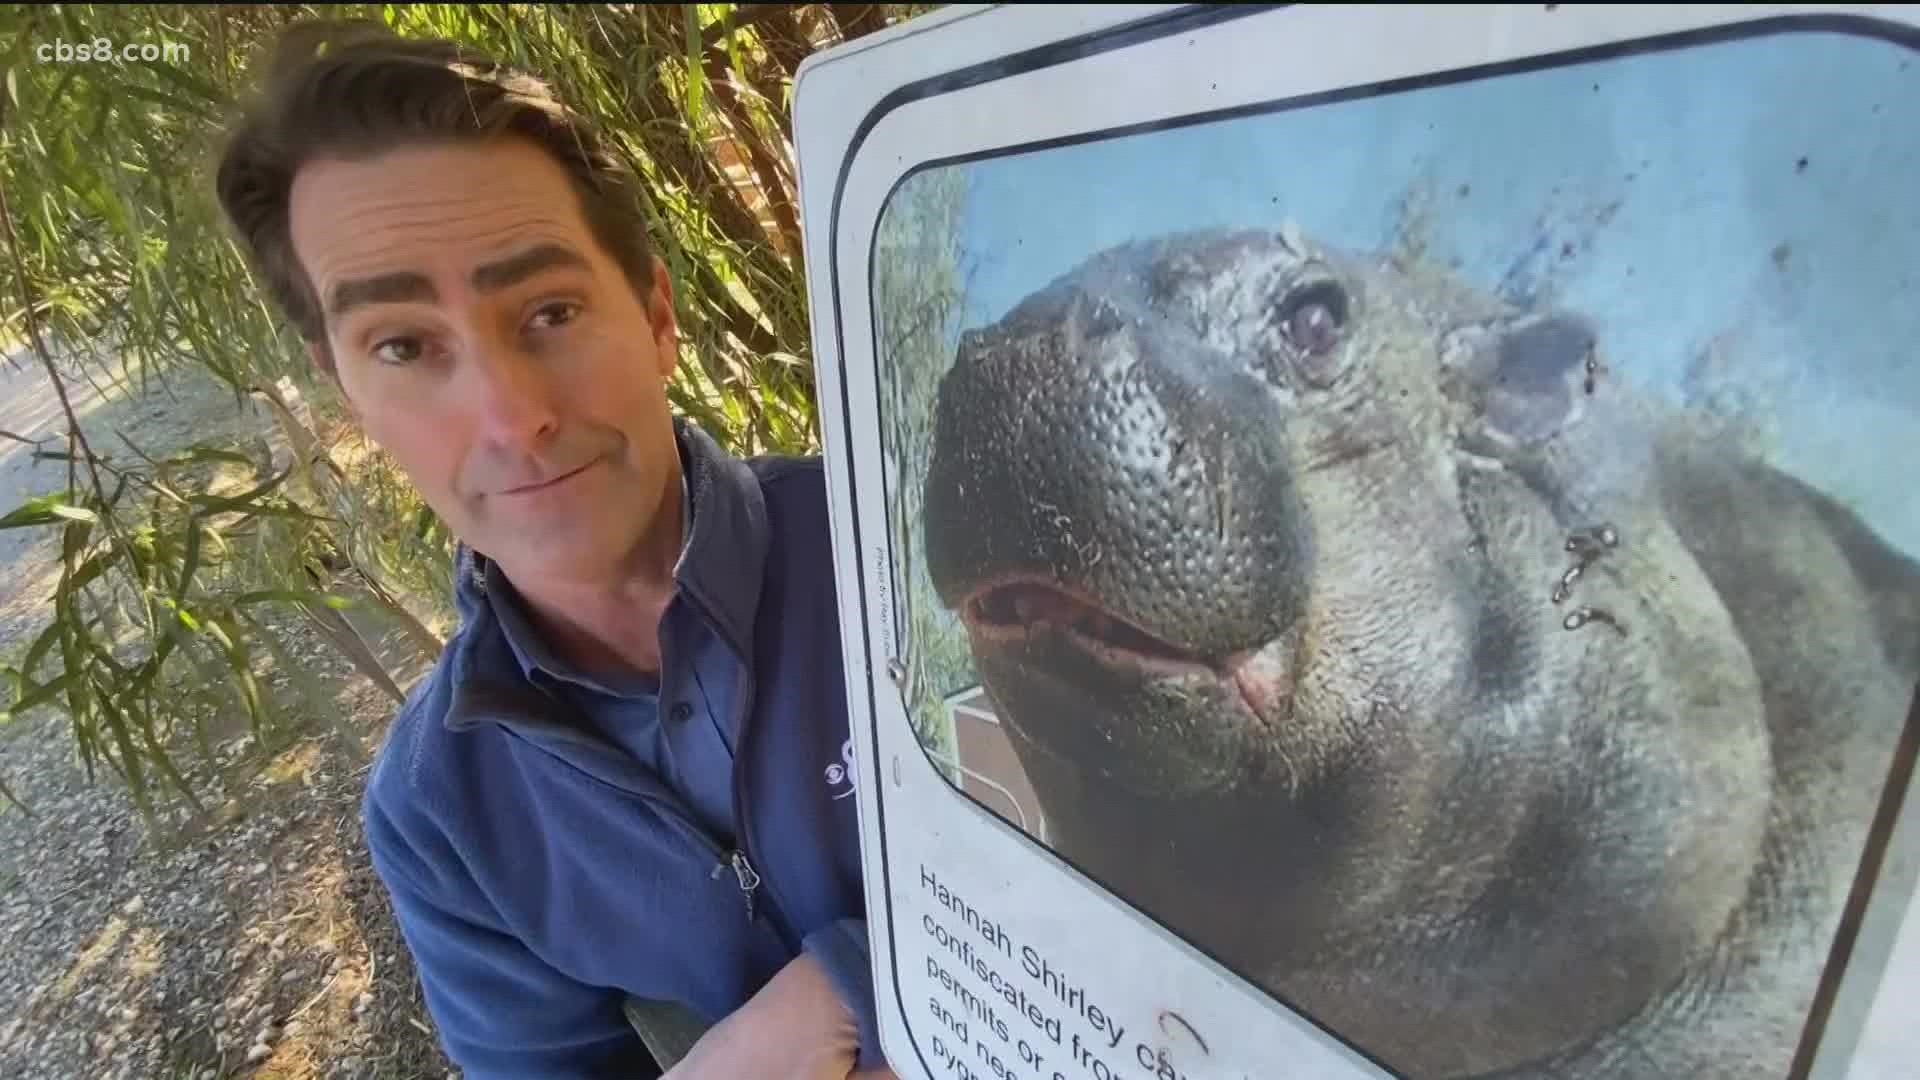 The hippo was rescued from an Escondido backyard and taken to San Diego Humane Society's Ramona Wildlife Center in 2002.